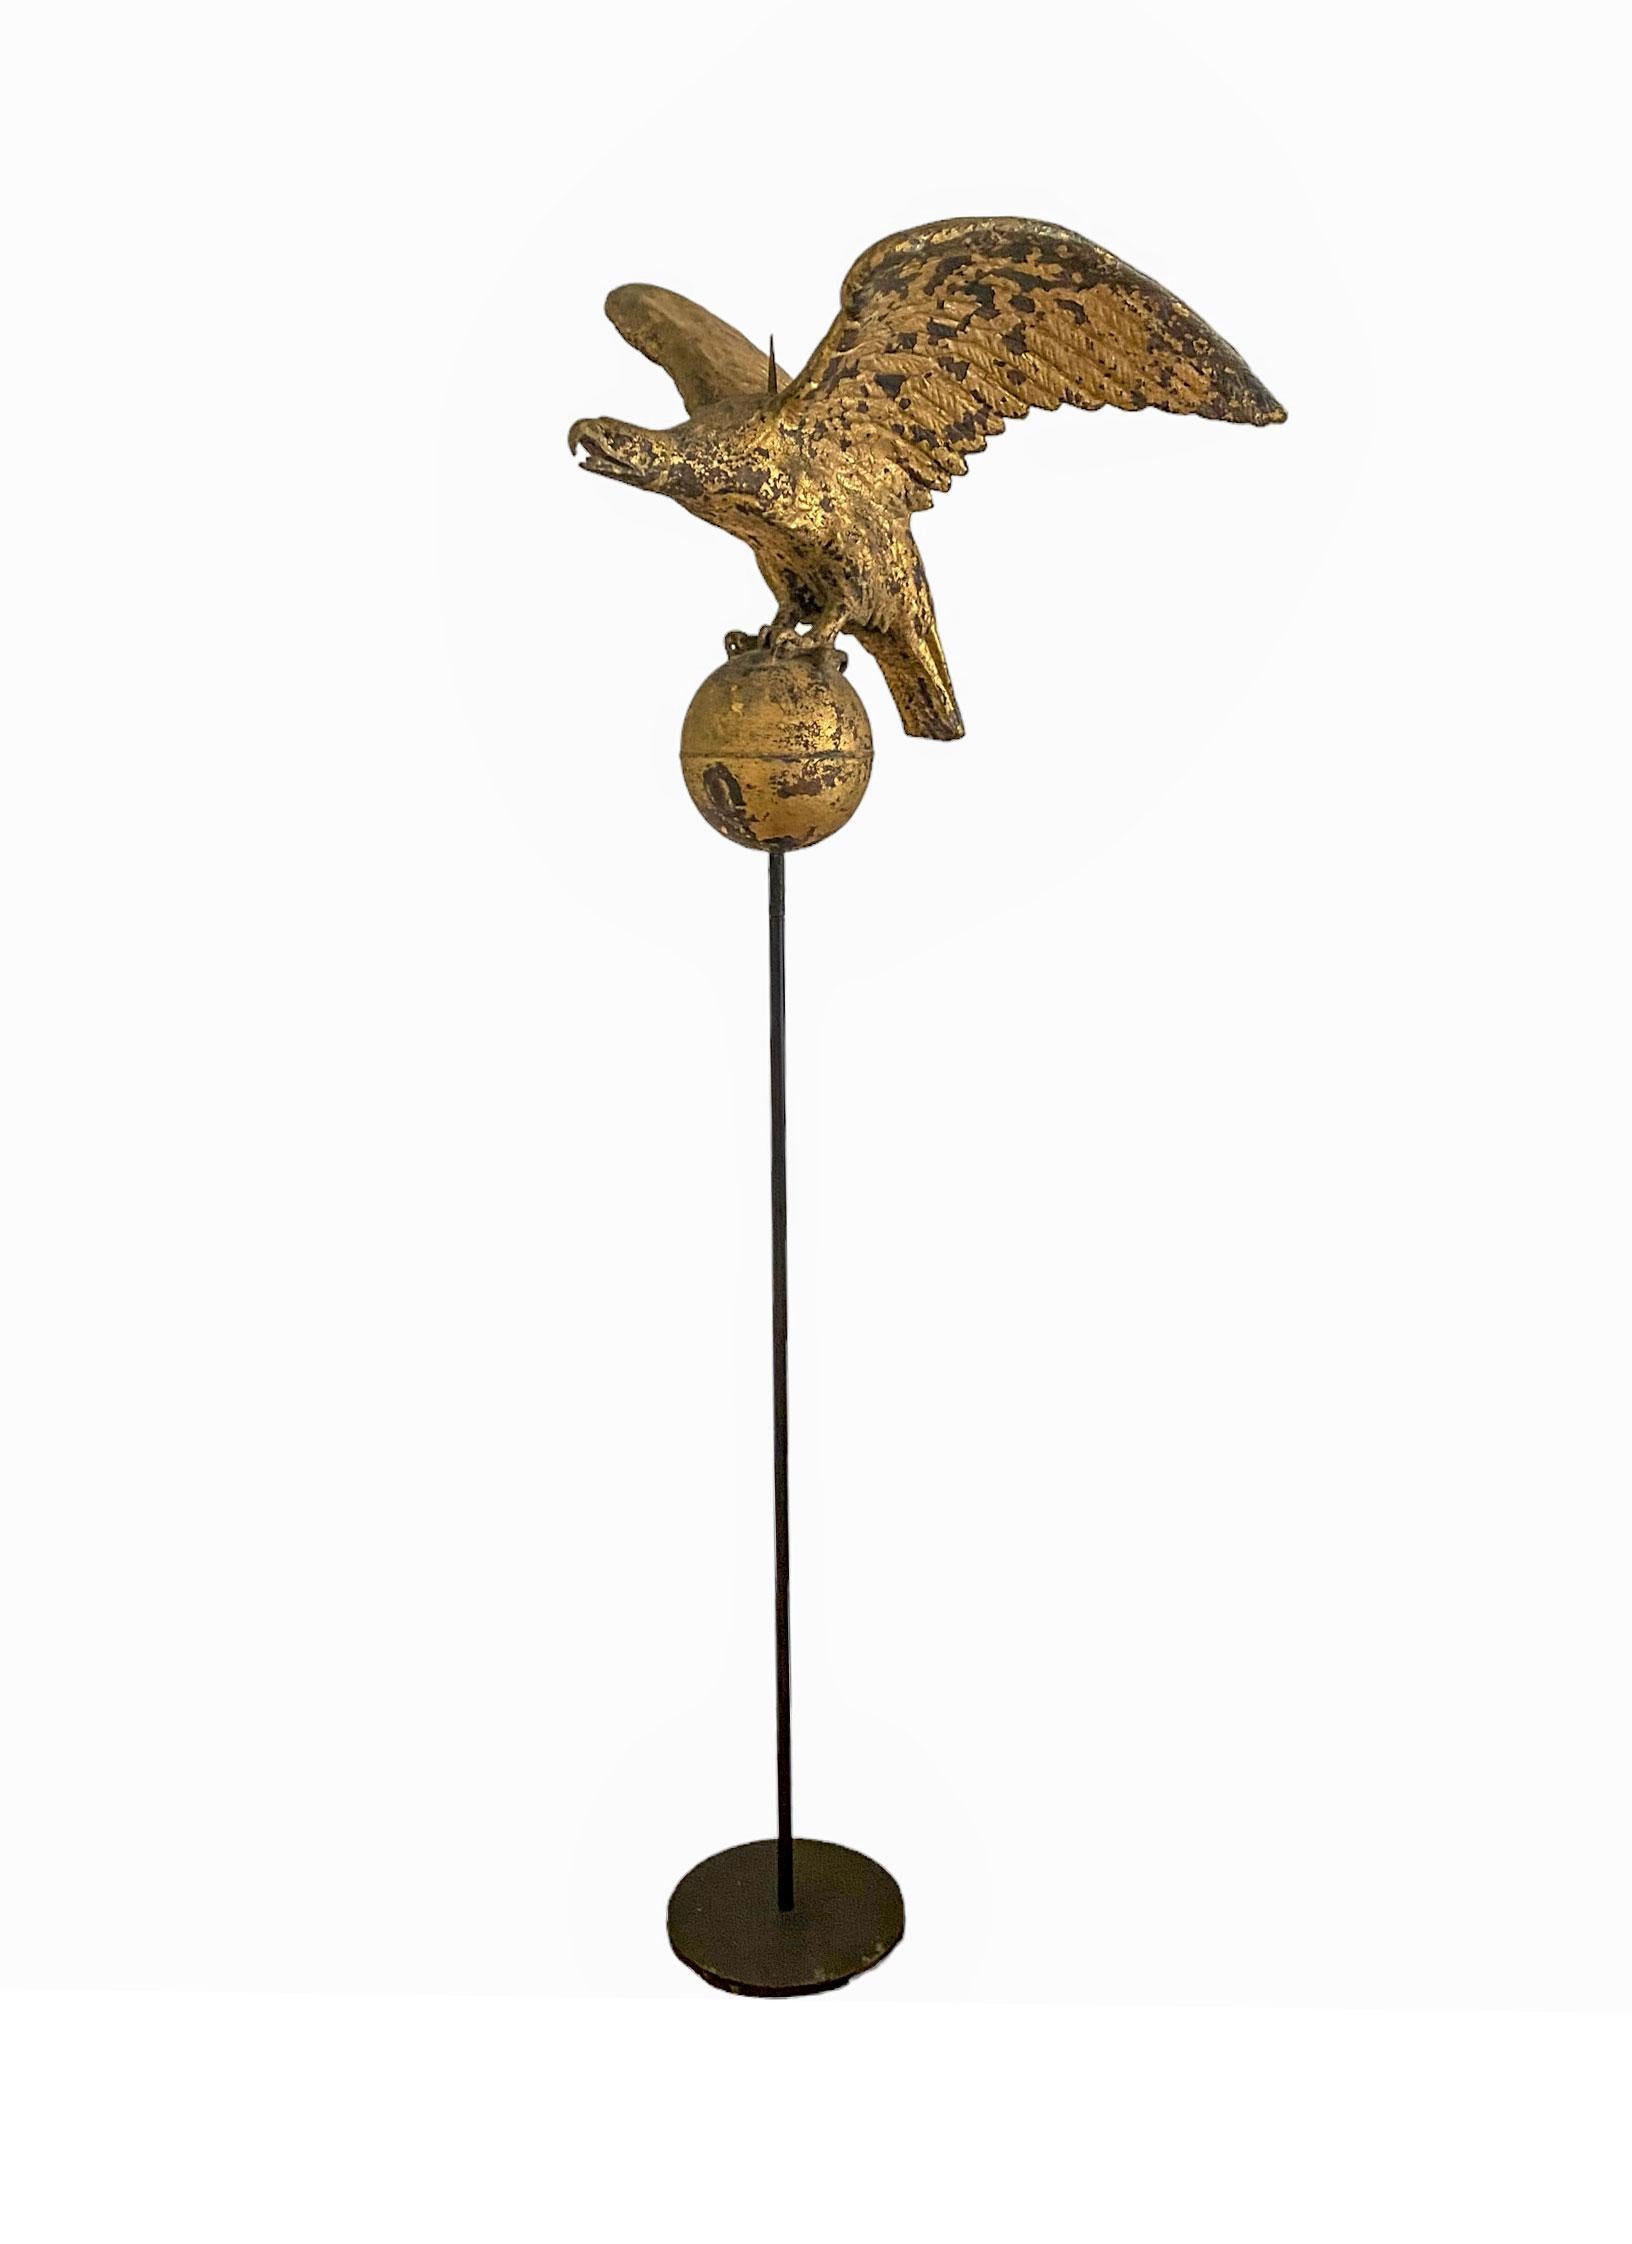 Folk Art 19th Century Eagle Weathervane, Attributed to Cushing & White For Sale